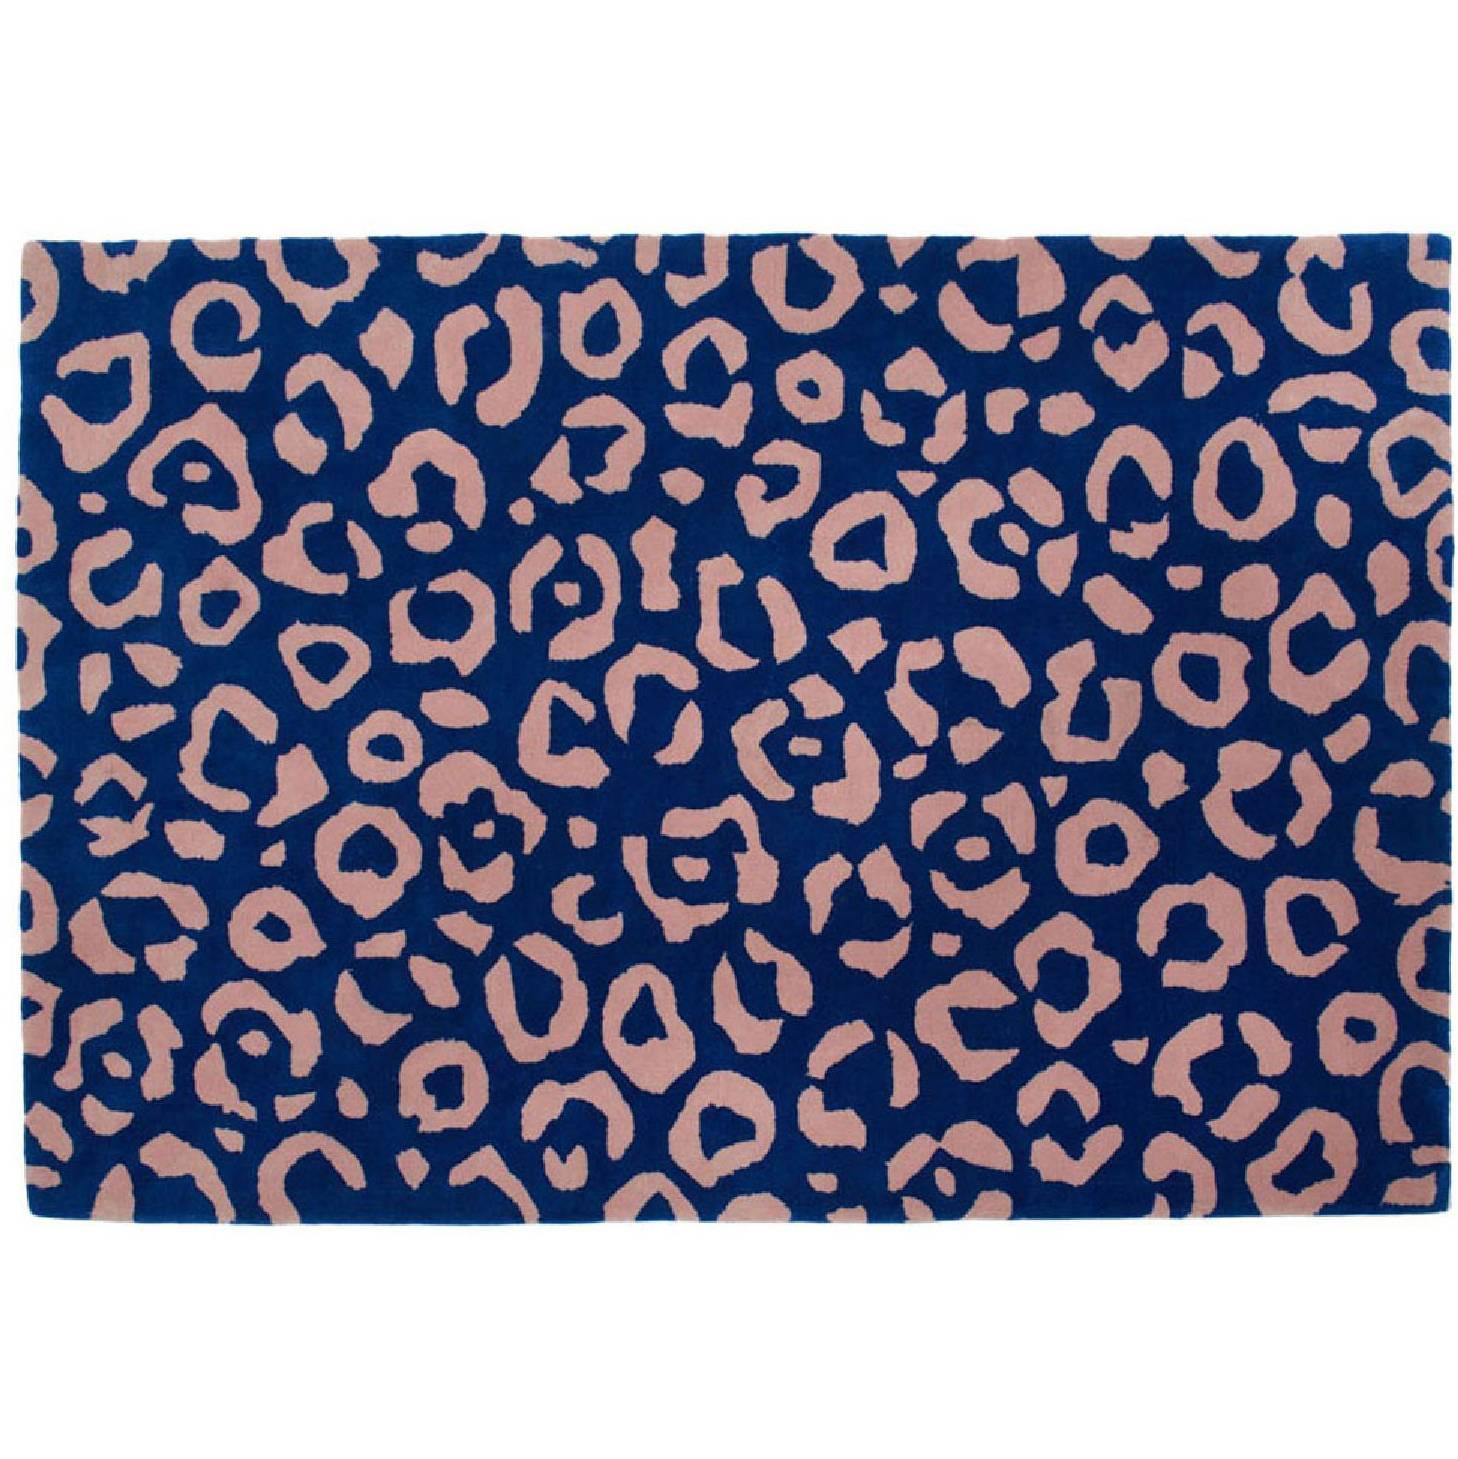 Aelfie Cheetah Animal Print Blue and Pink Tufted Rug 8x10 For Sale